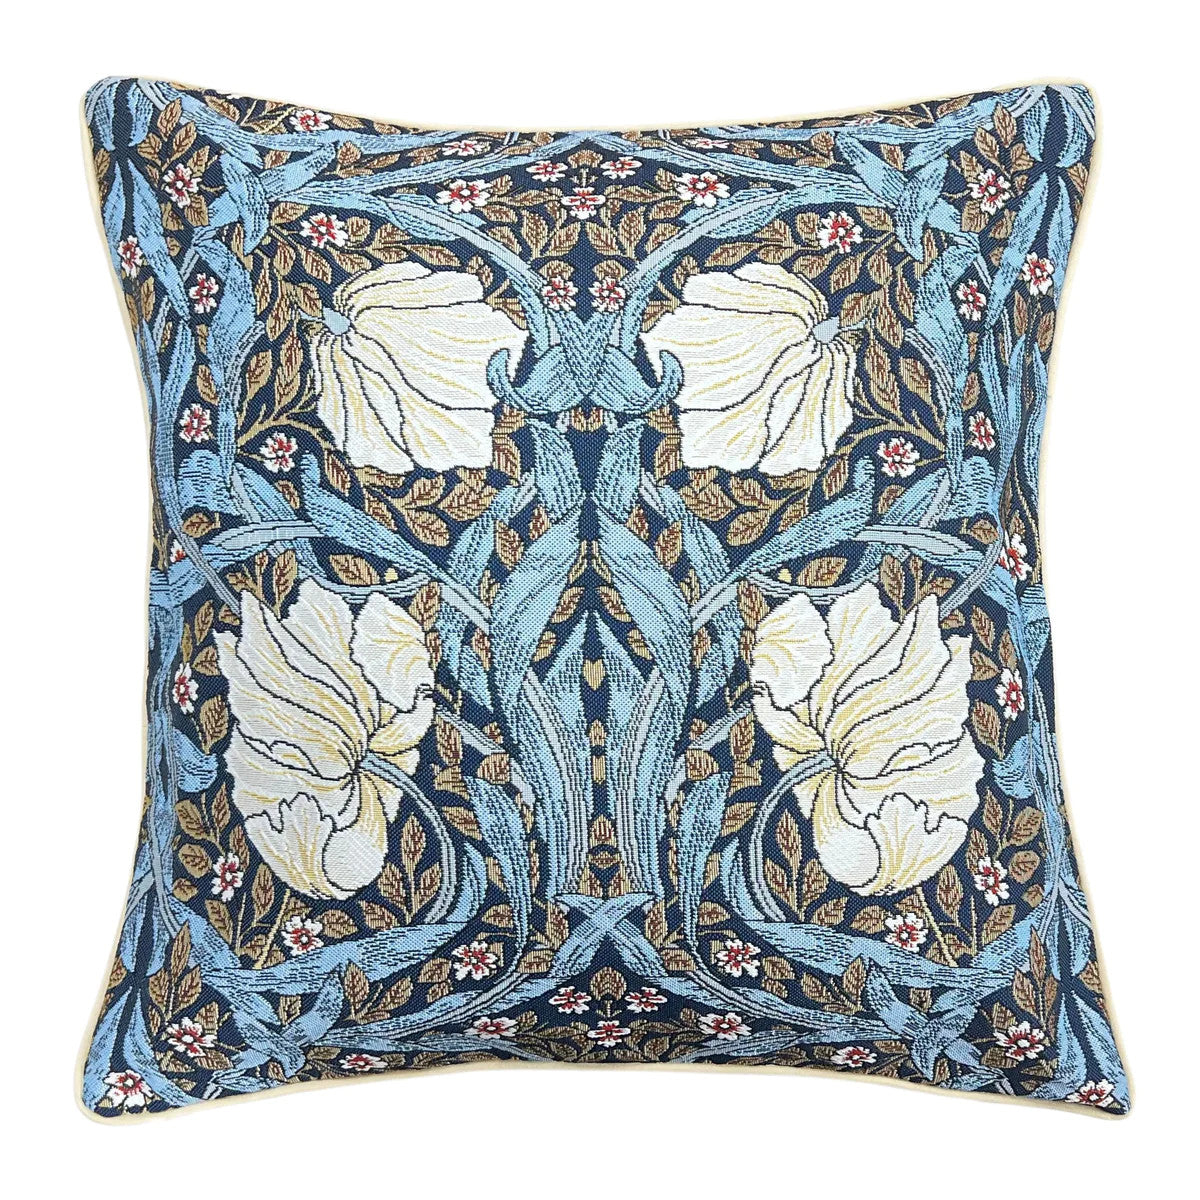 William Morris Pimpernel and Thyme Blue Pillow